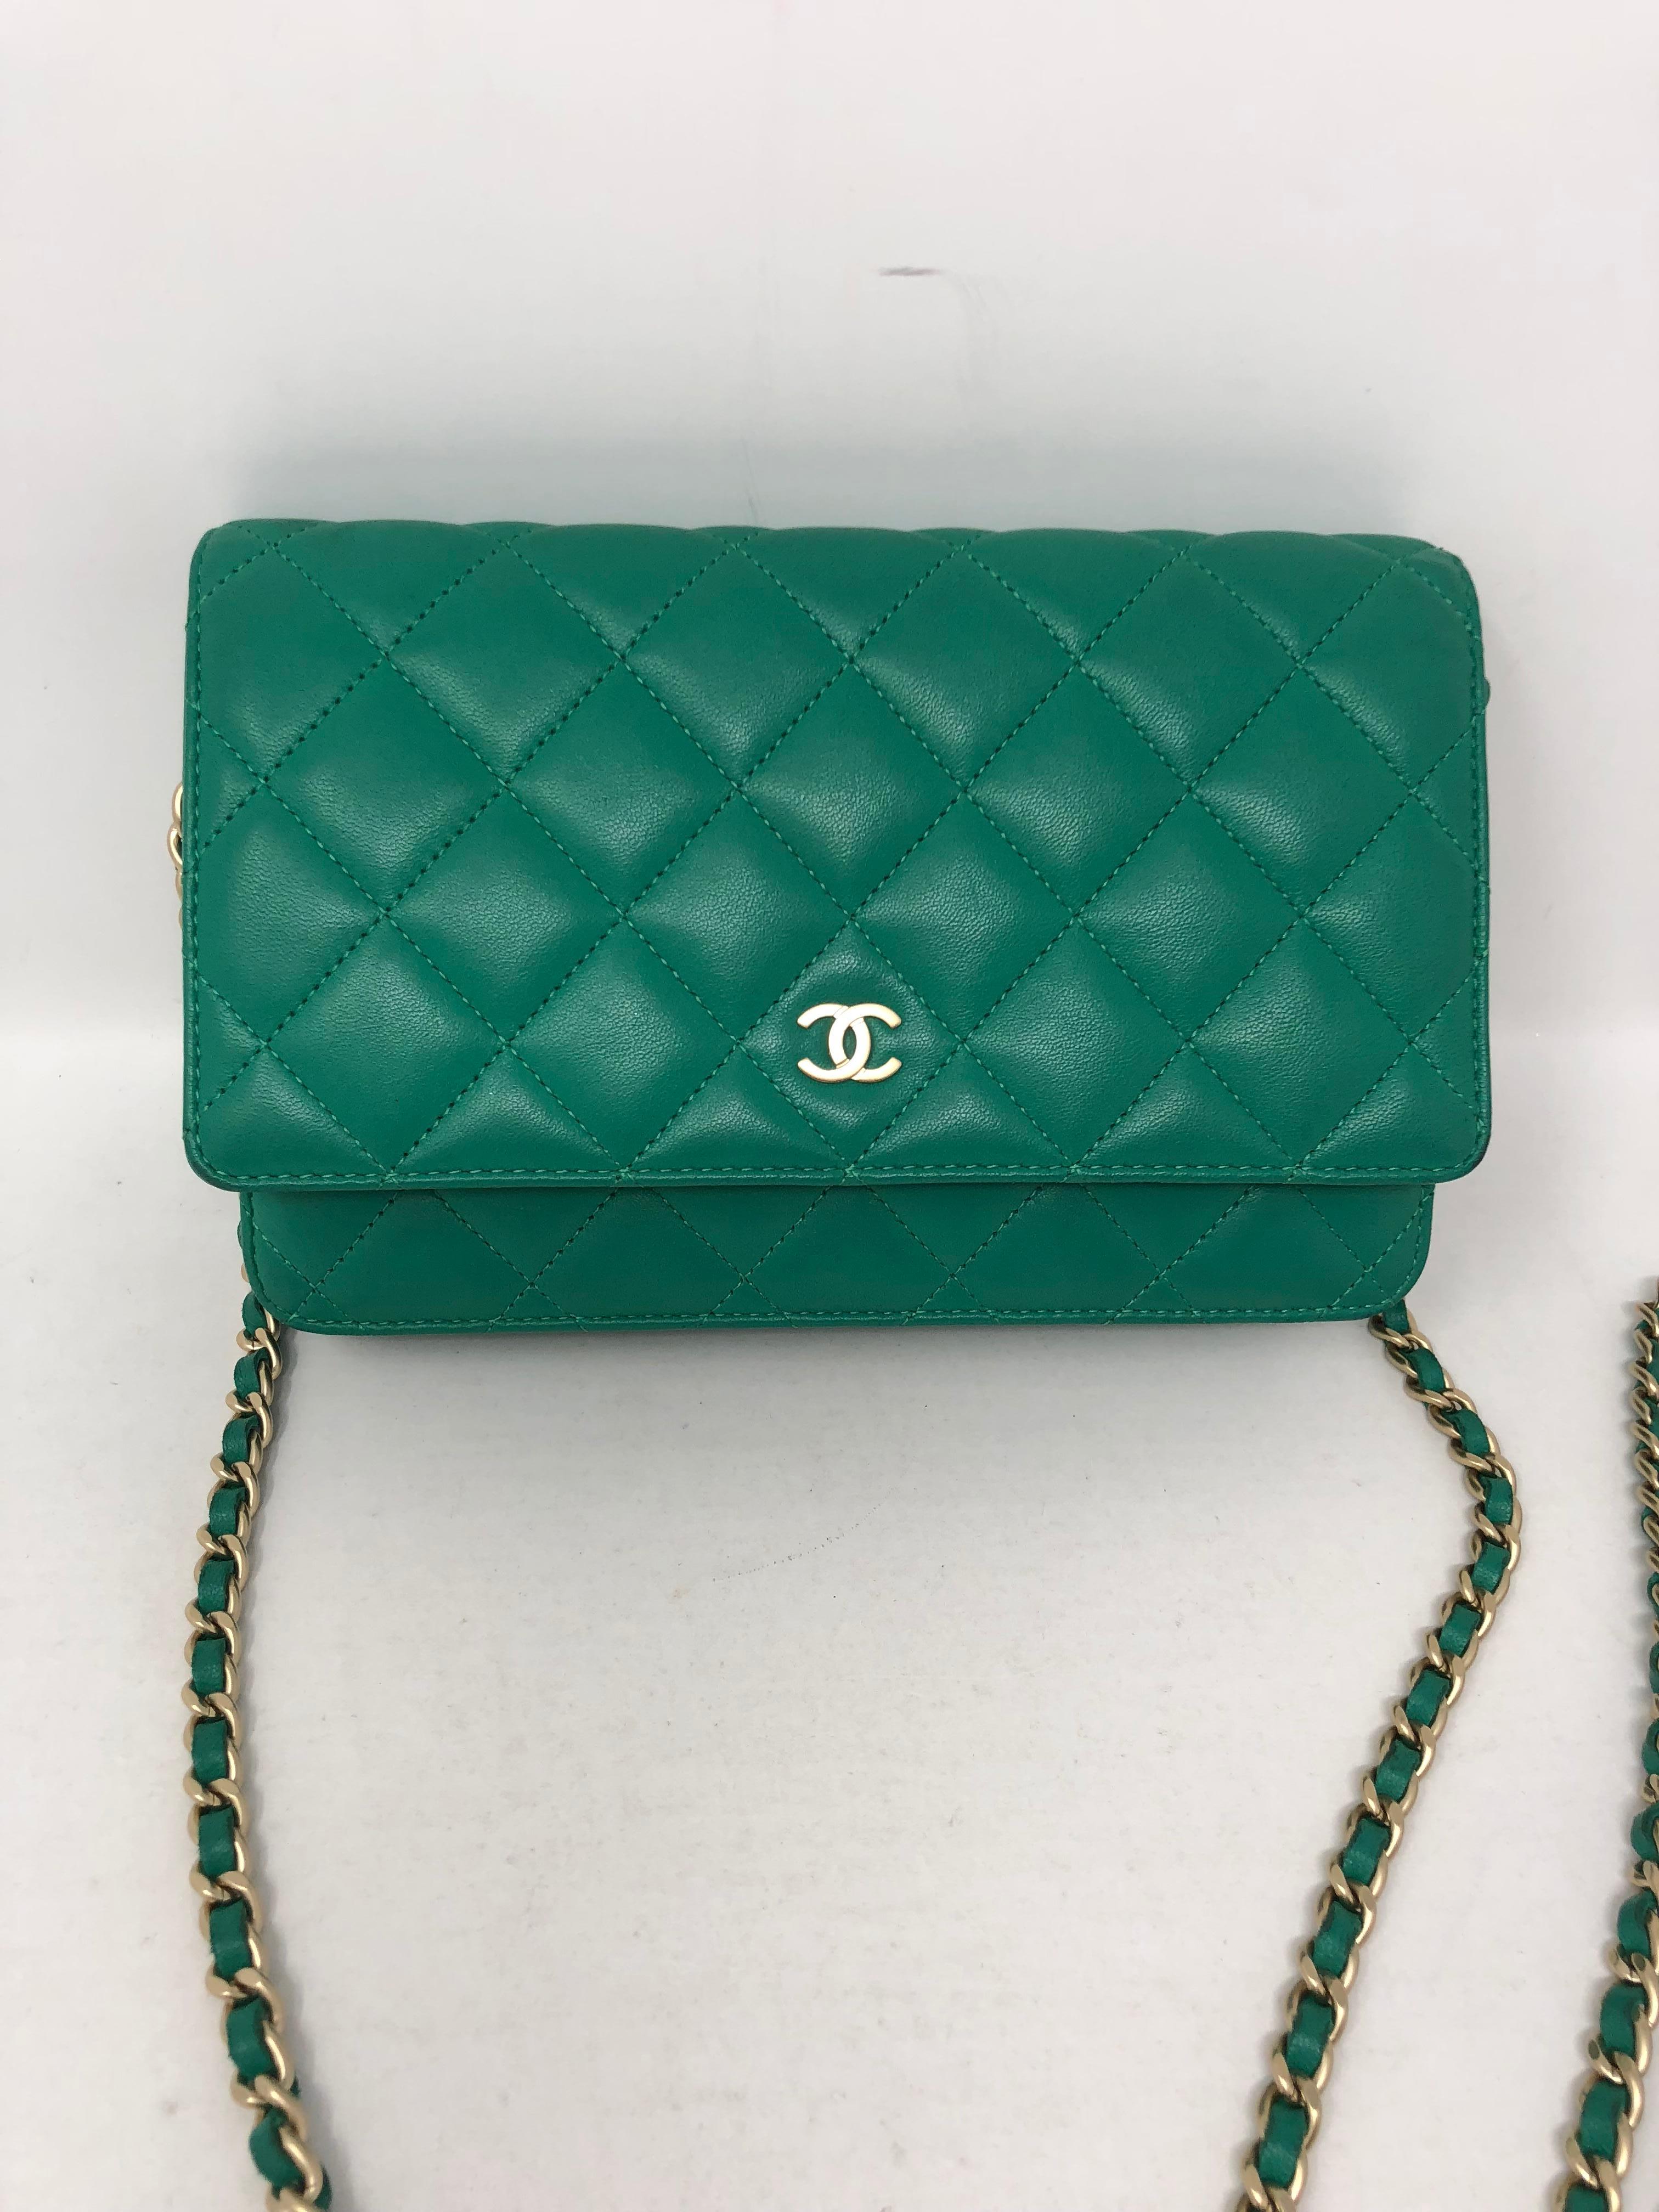 Chanel Mint Green Wallet on a Chain Crossbody Bag. Bright green color with silver hardware. Good condition like new. Can be worn as a crossbody or as a clutch. Guaranteed authentic.